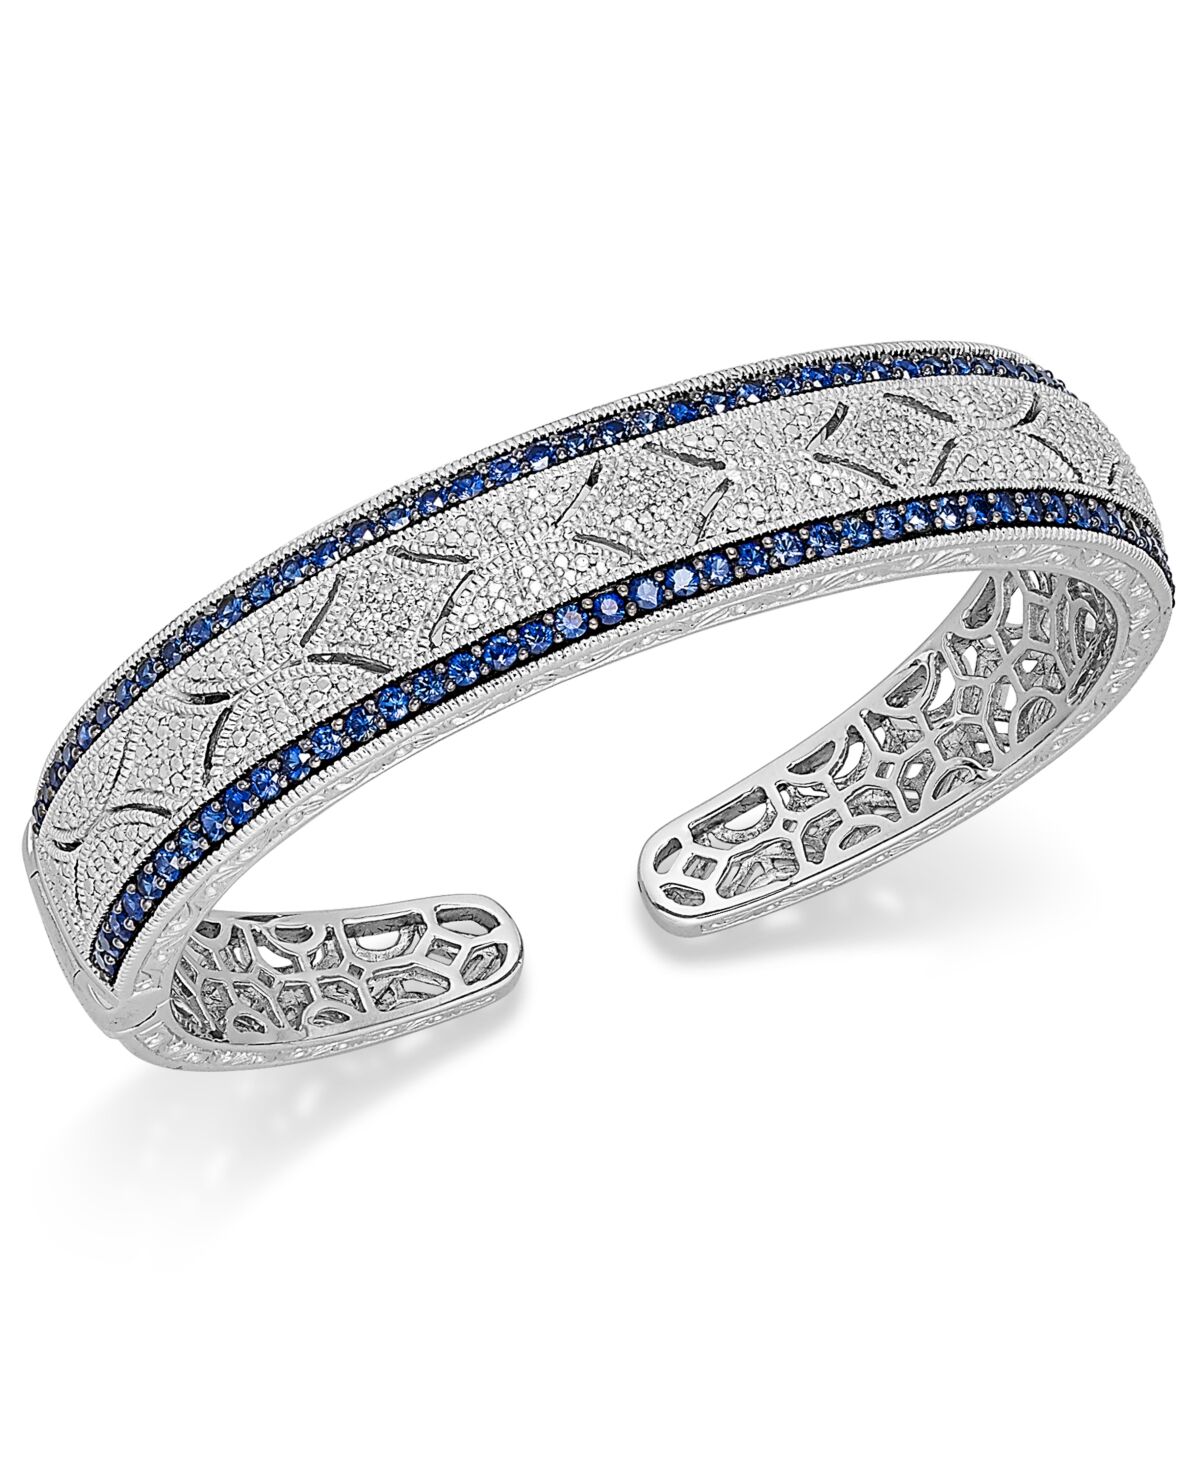 Macy's Sapphire (2-3/8 ct. t.w.) and Diamond (1/10 ct. t.w.) Antique Cuff Bracelet in Sterling Silver (Also available in Emerald and Ruby) - Sapphire